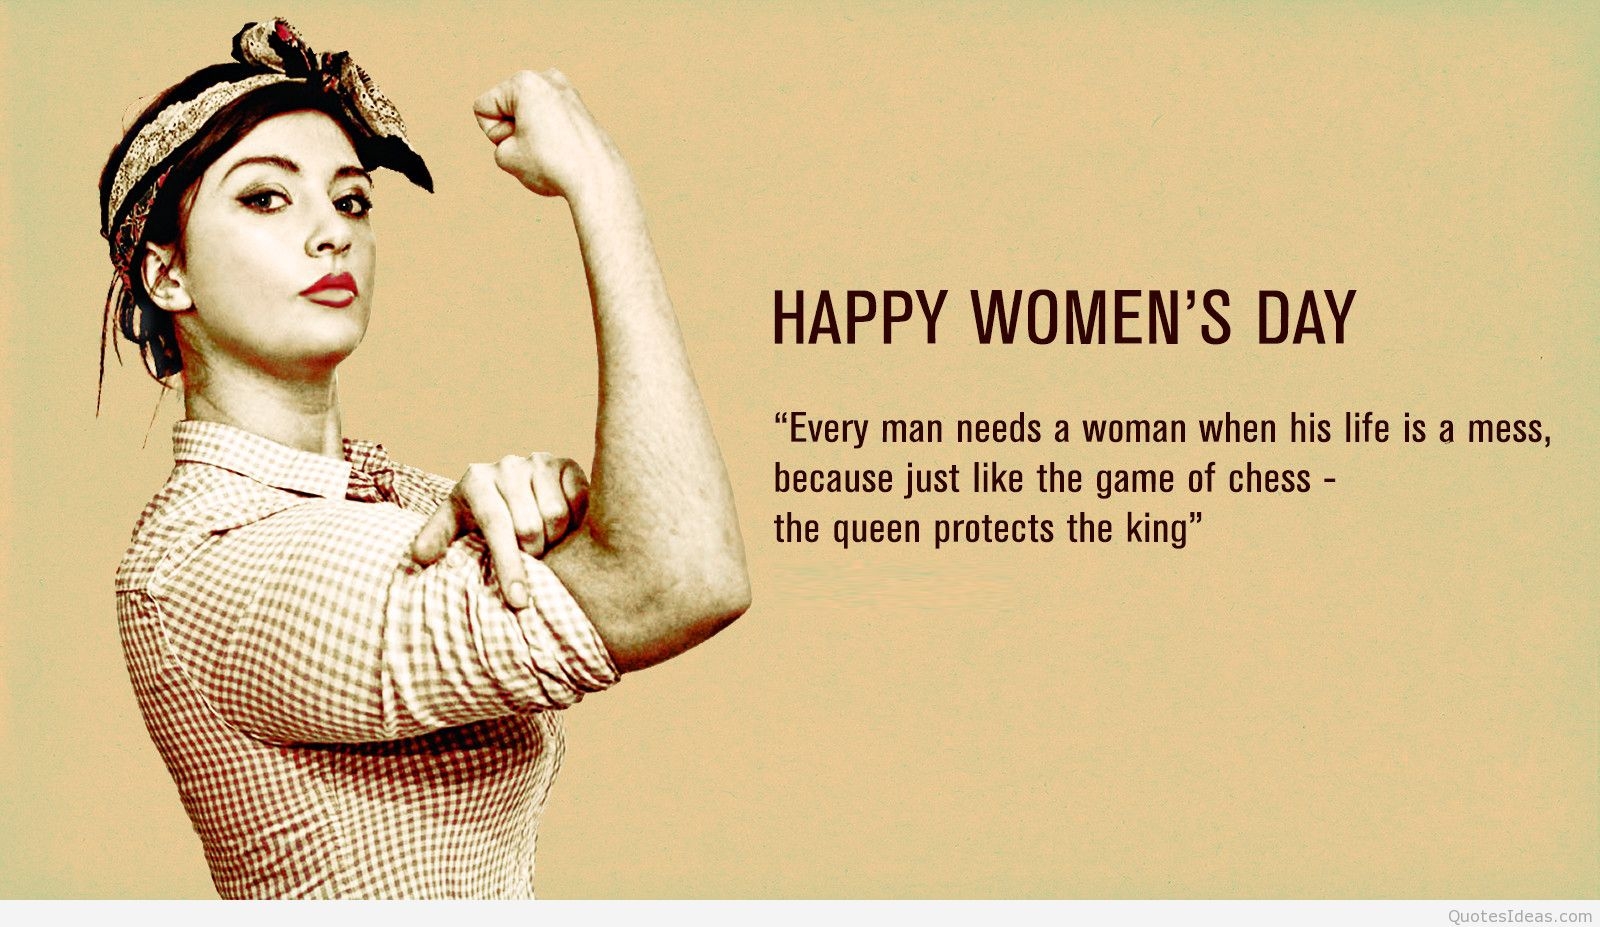 Download Wallpaper With Quotes On Women's Day Hd - International Women's Day 2017 Theme , HD Wallpaper & Backgrounds